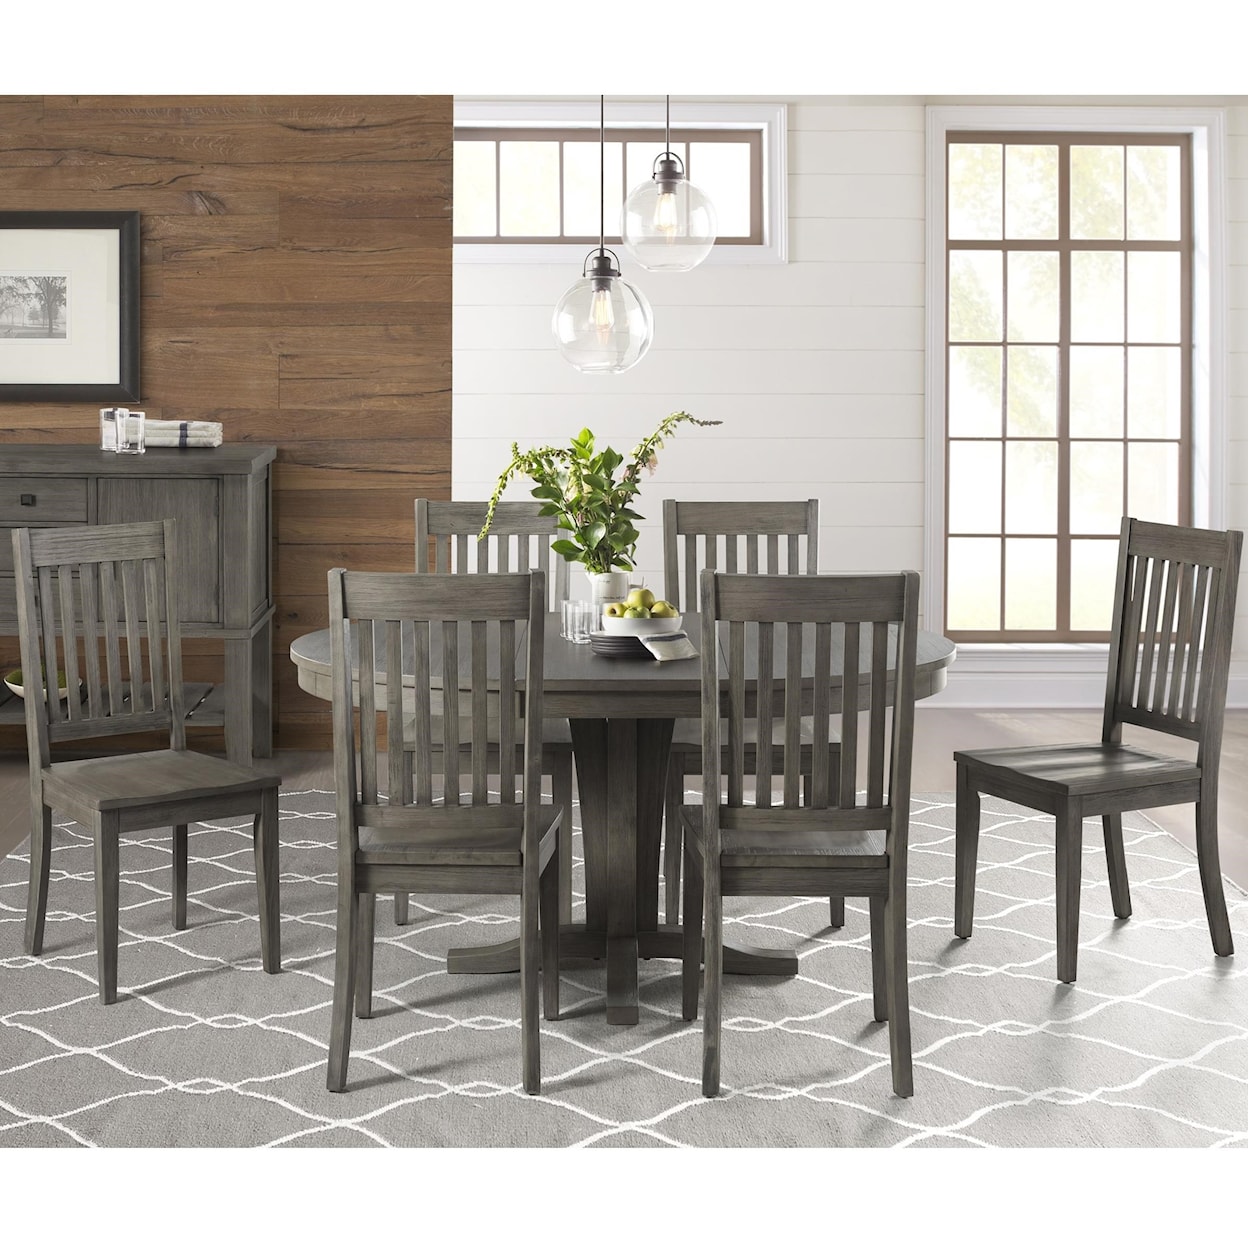 AAmerica Huron Pedestal Table and Chair Set